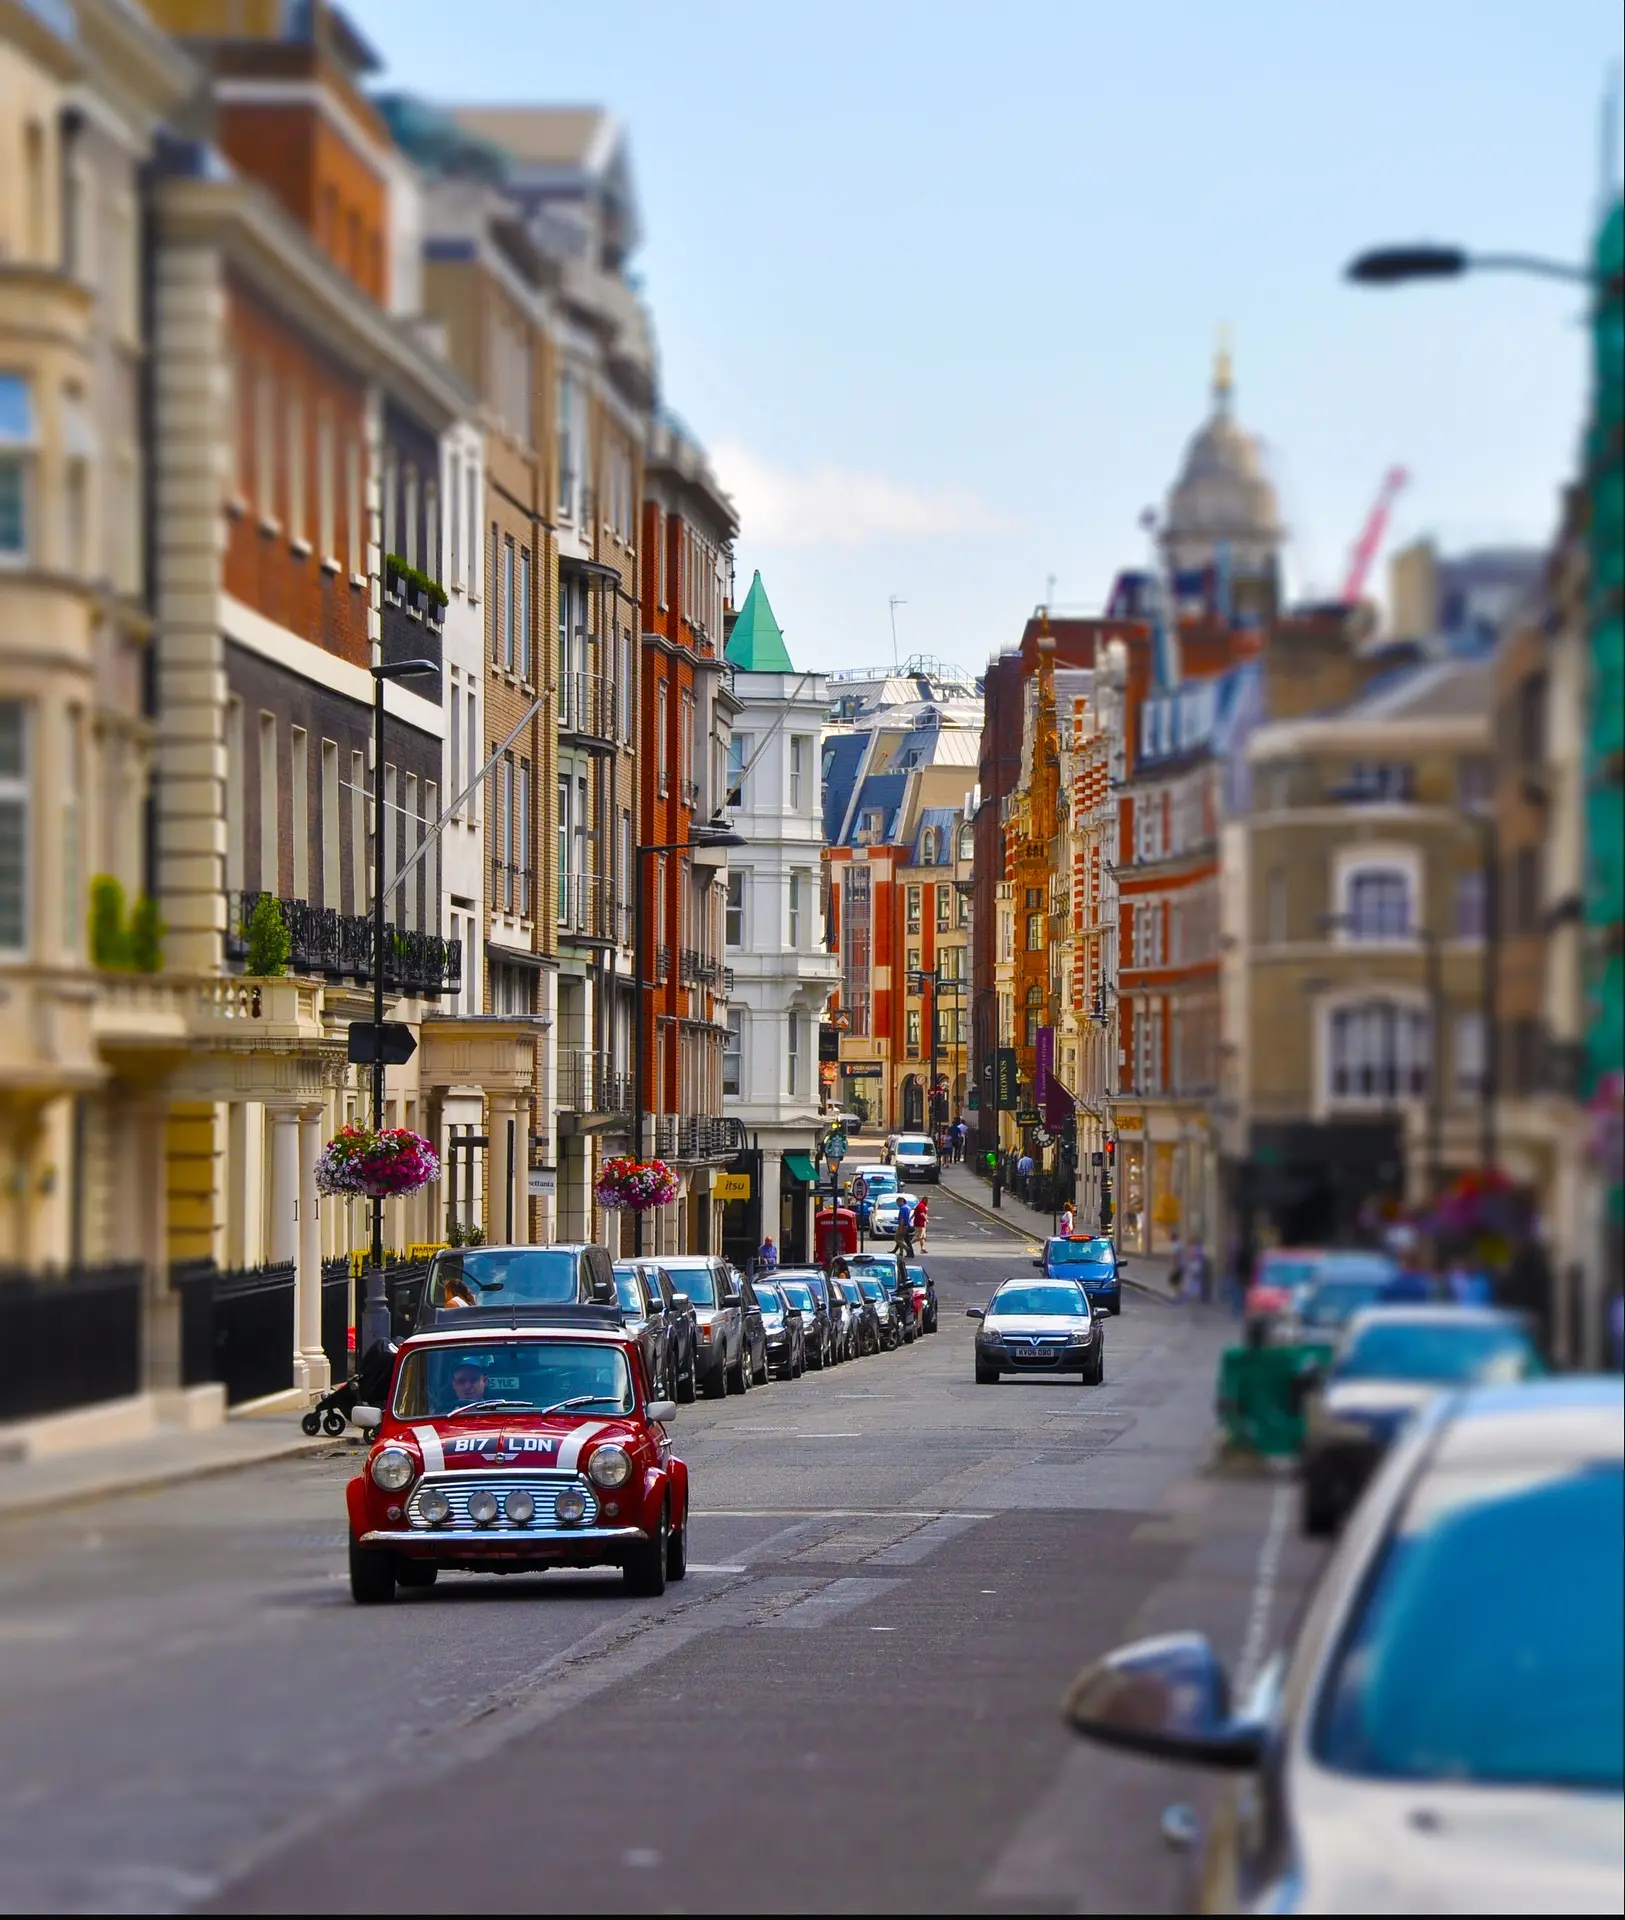 Mini Cooper driving in the streets in London